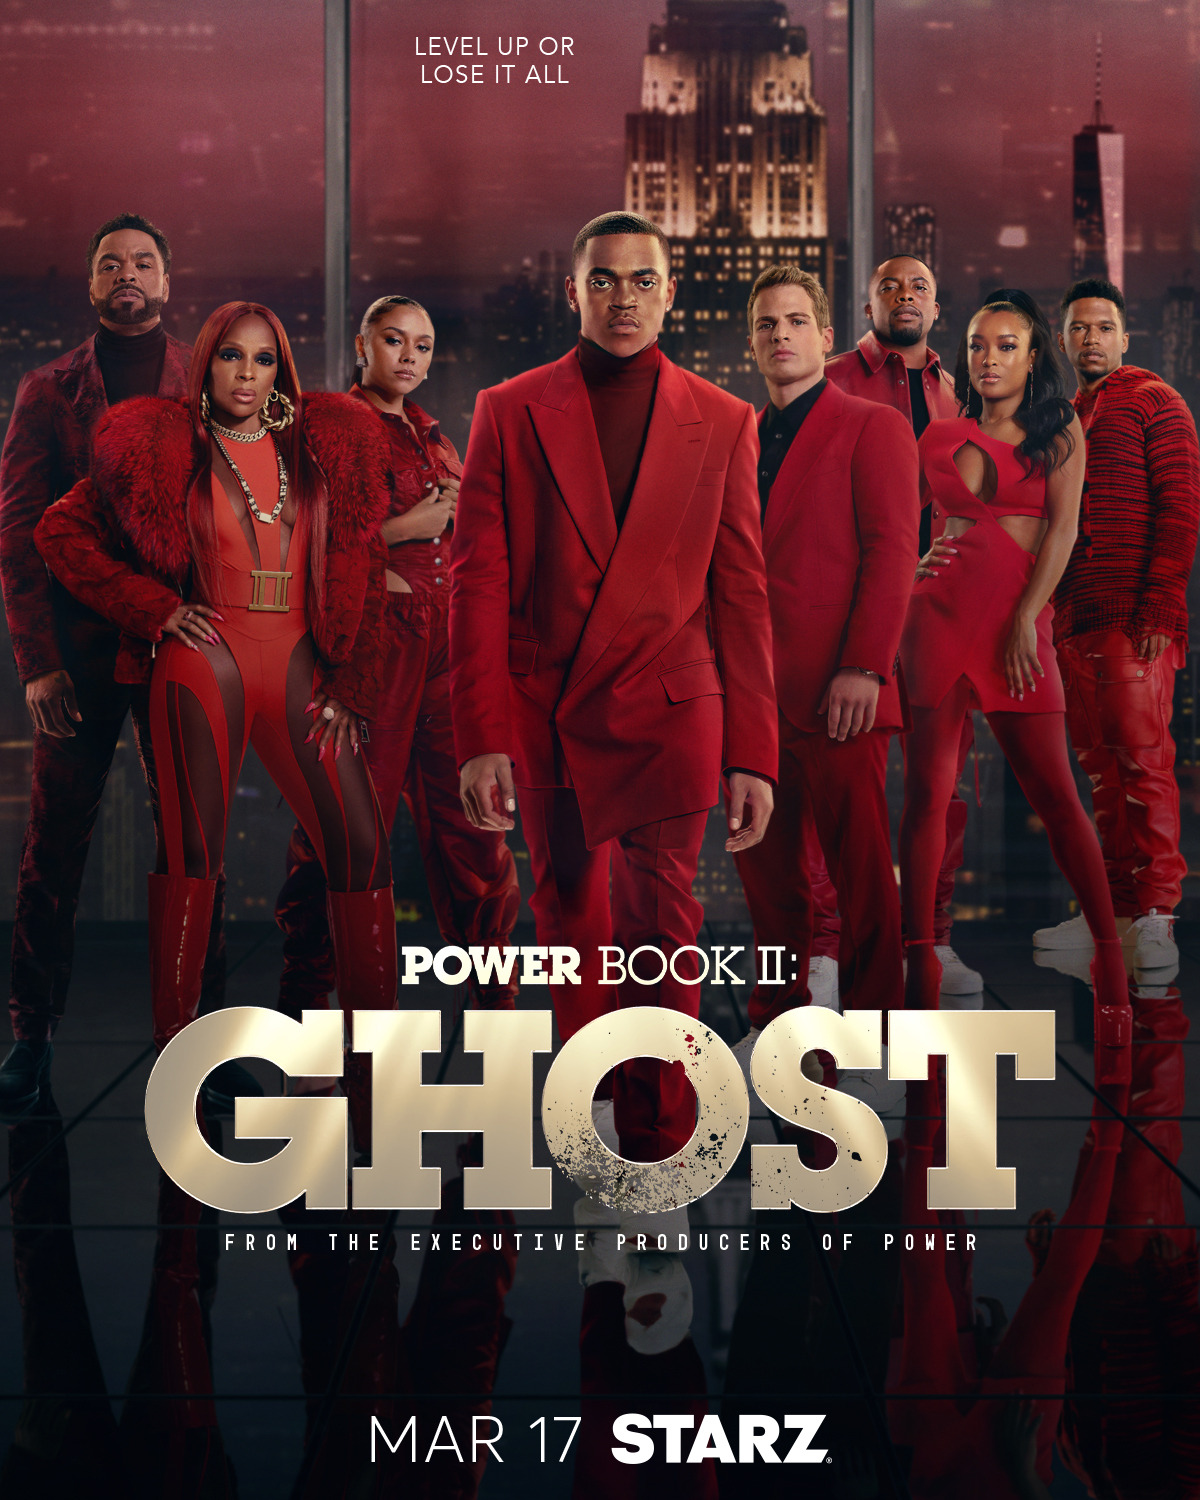 Extra Large TV Poster Image for Power Book II: Ghost (#11 of 14)